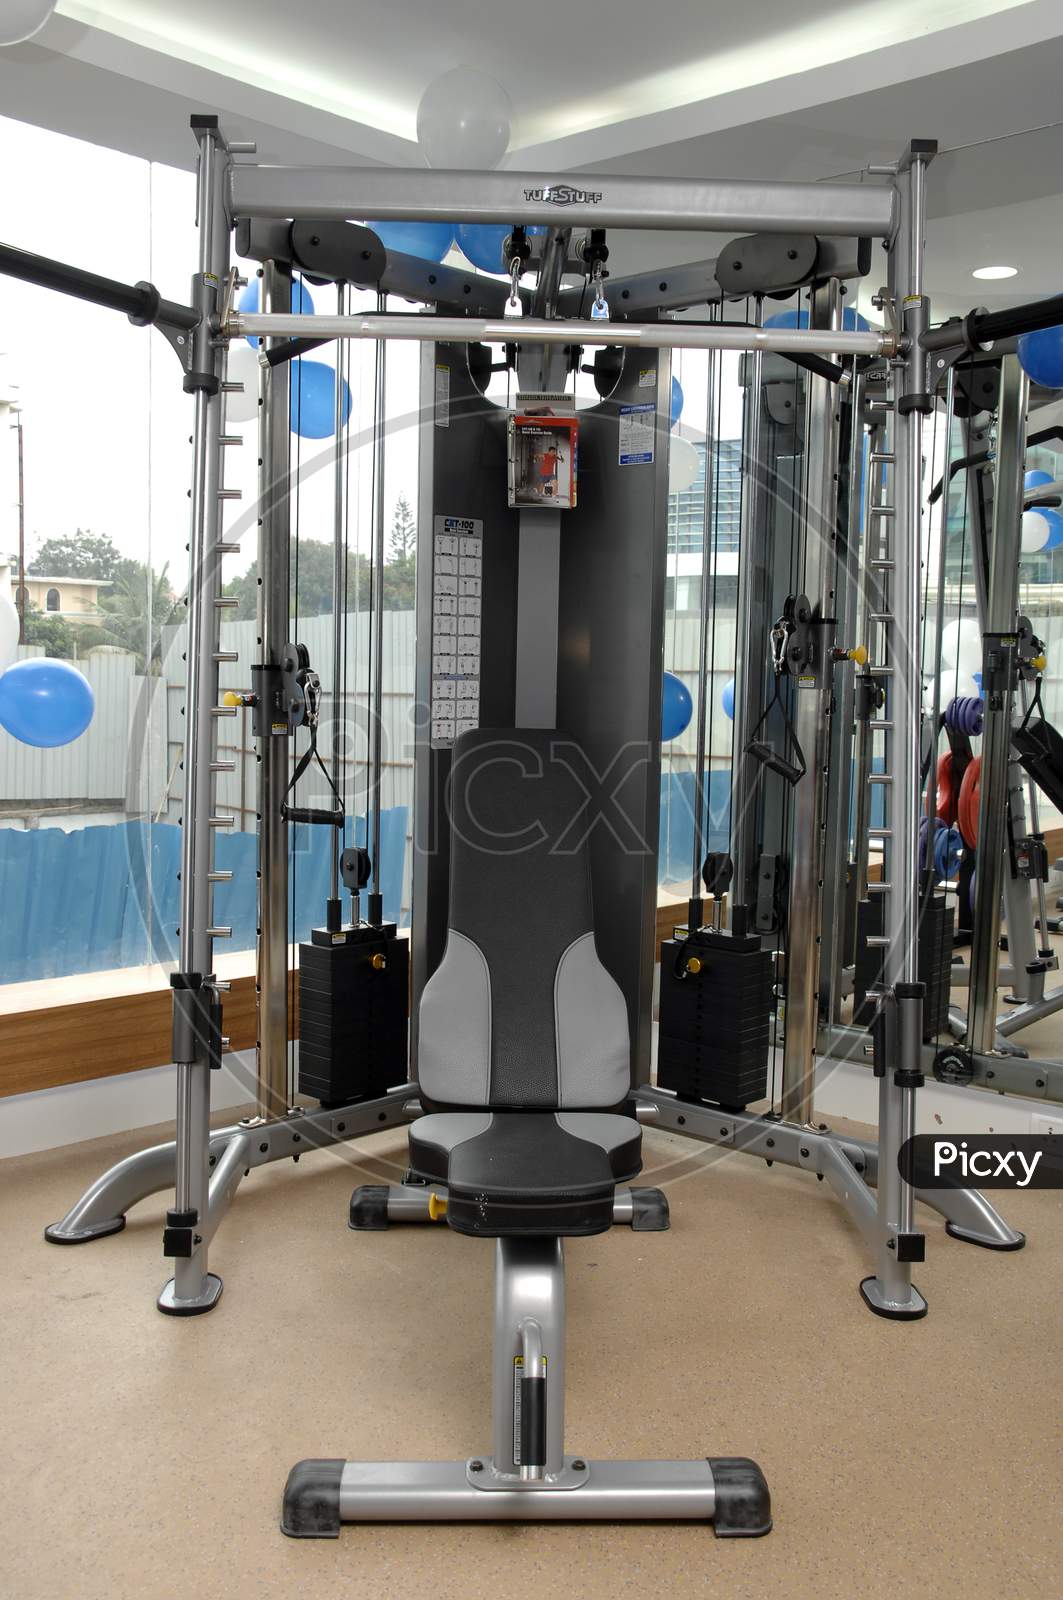 Back exercise machinery in a gym